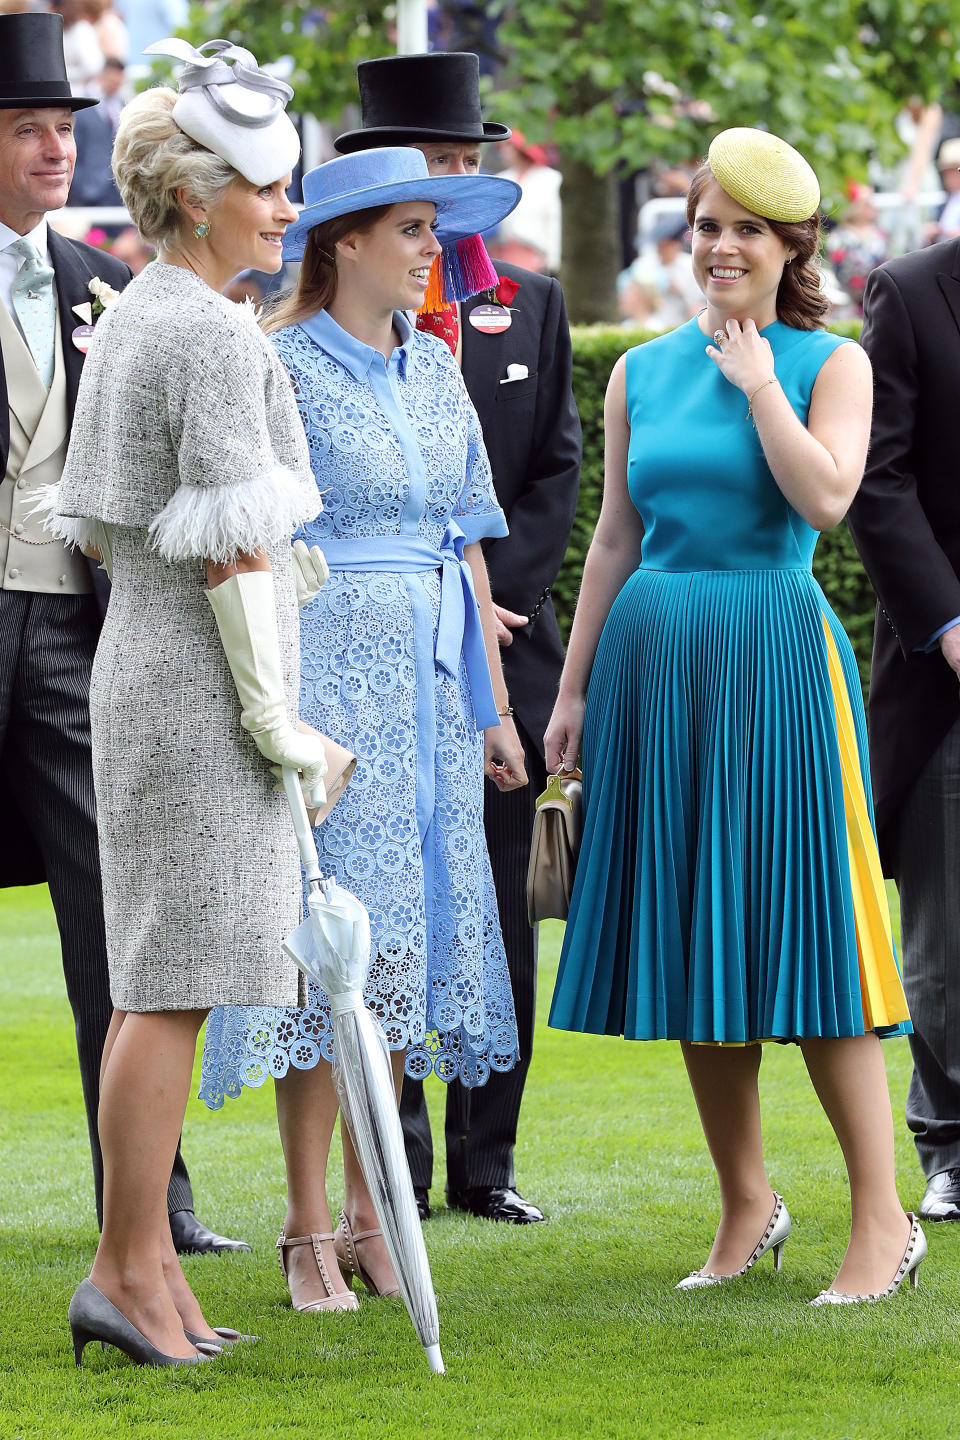 Princess Beatrice and Princess Eugenie. (Photo by Chris Jackson/Getty Images)